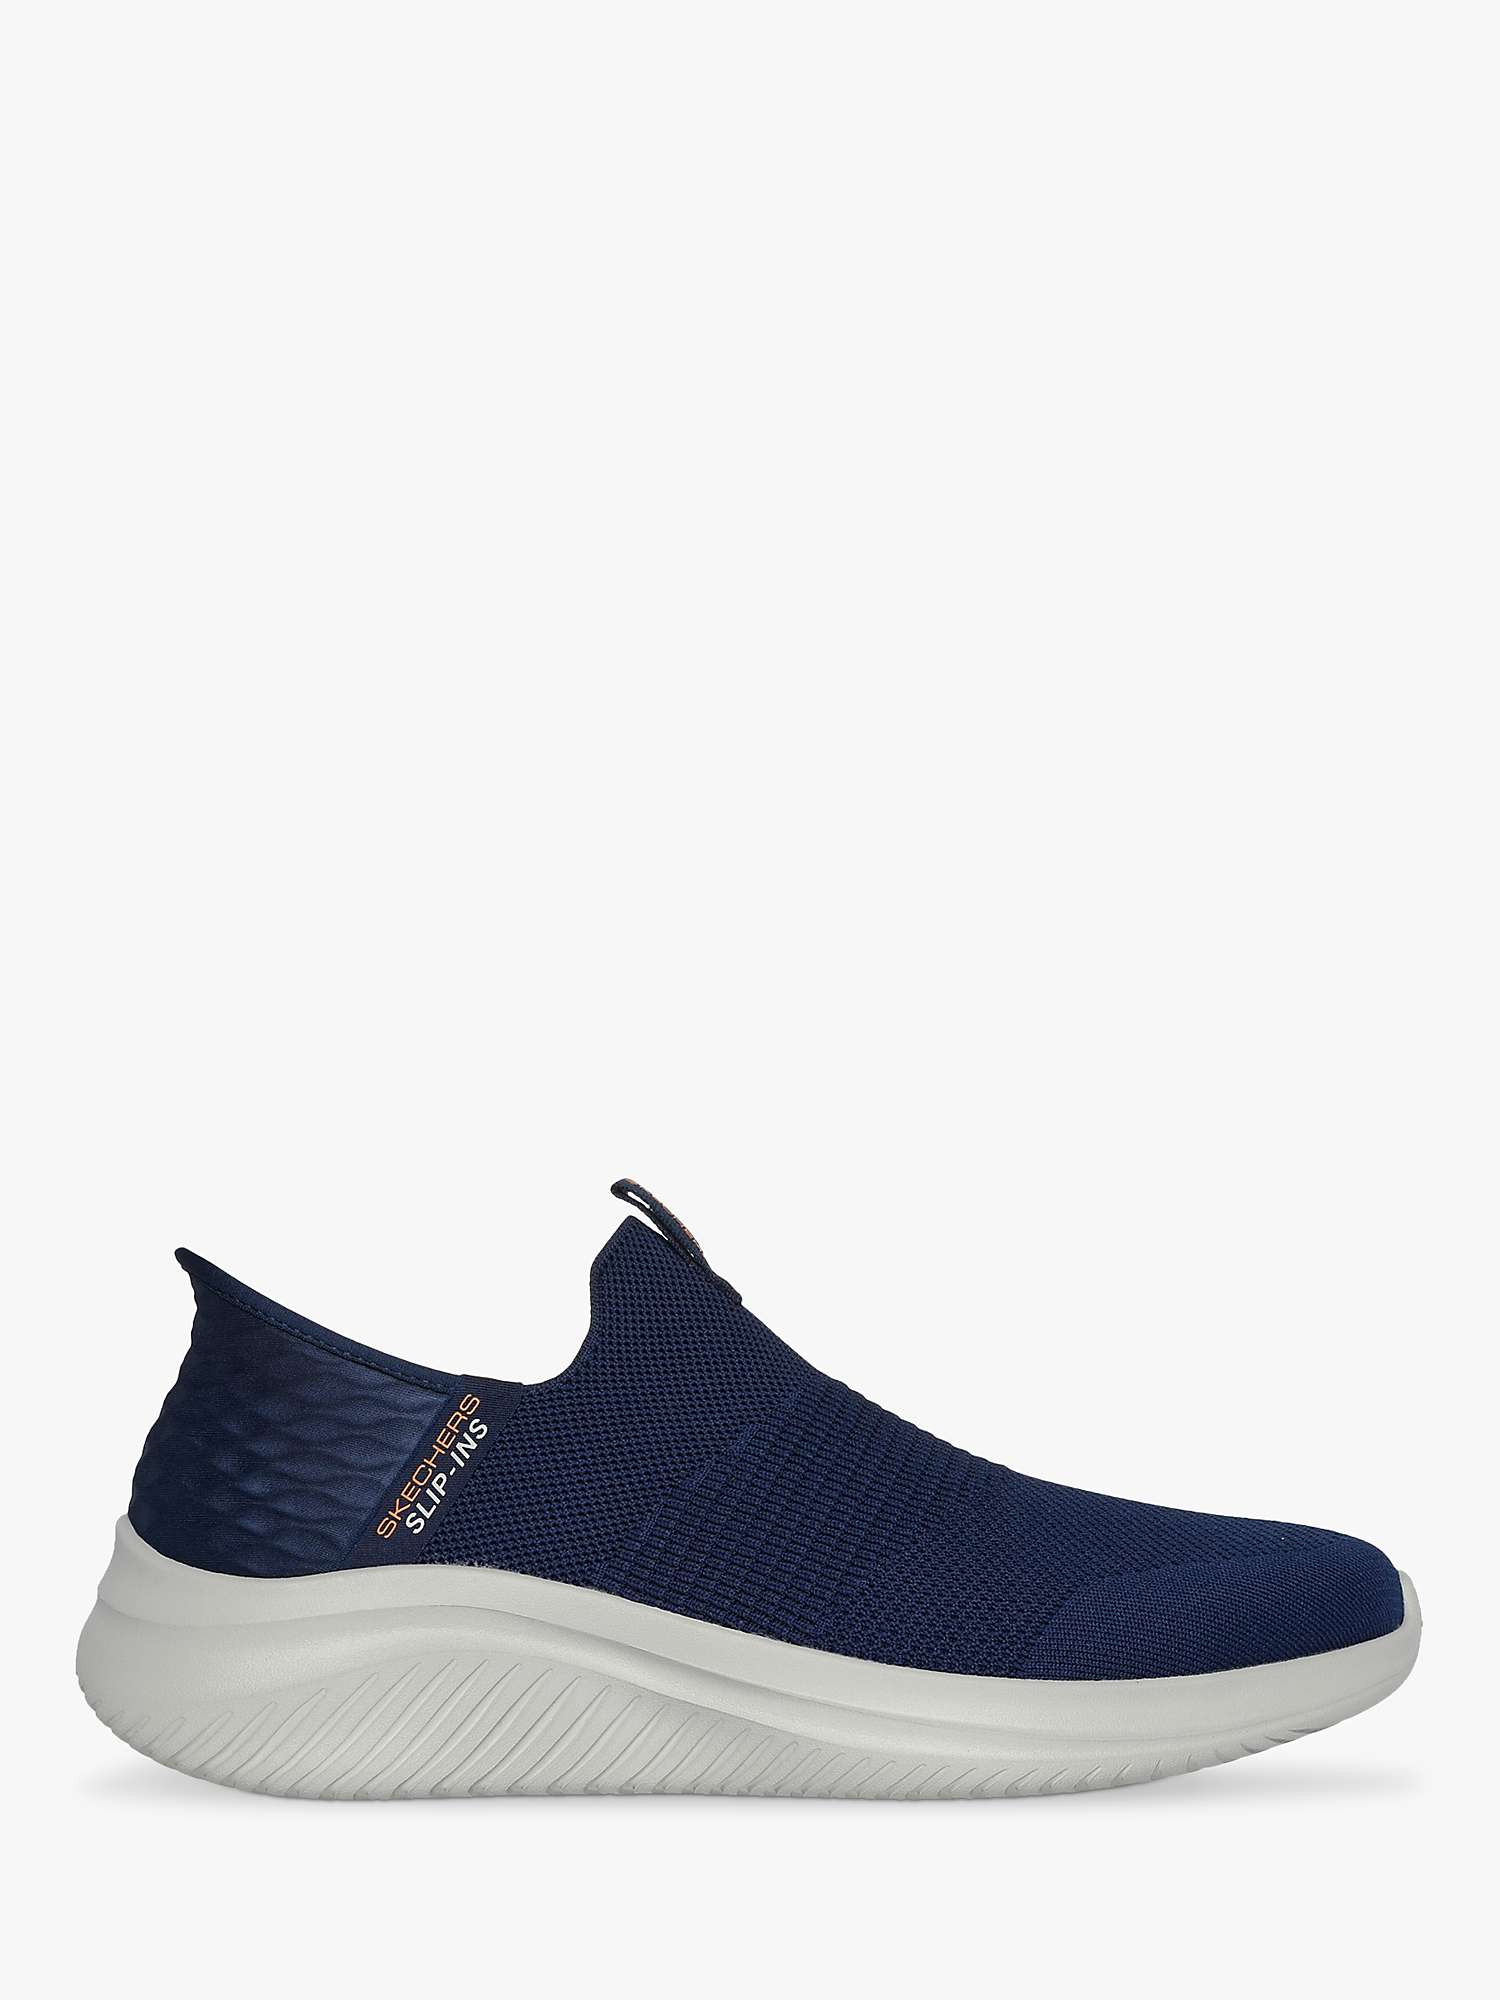 Buy Skechers Ultra Flex 3.0 Smooth Step Sports Shoes, Navy Online at johnlewis.com